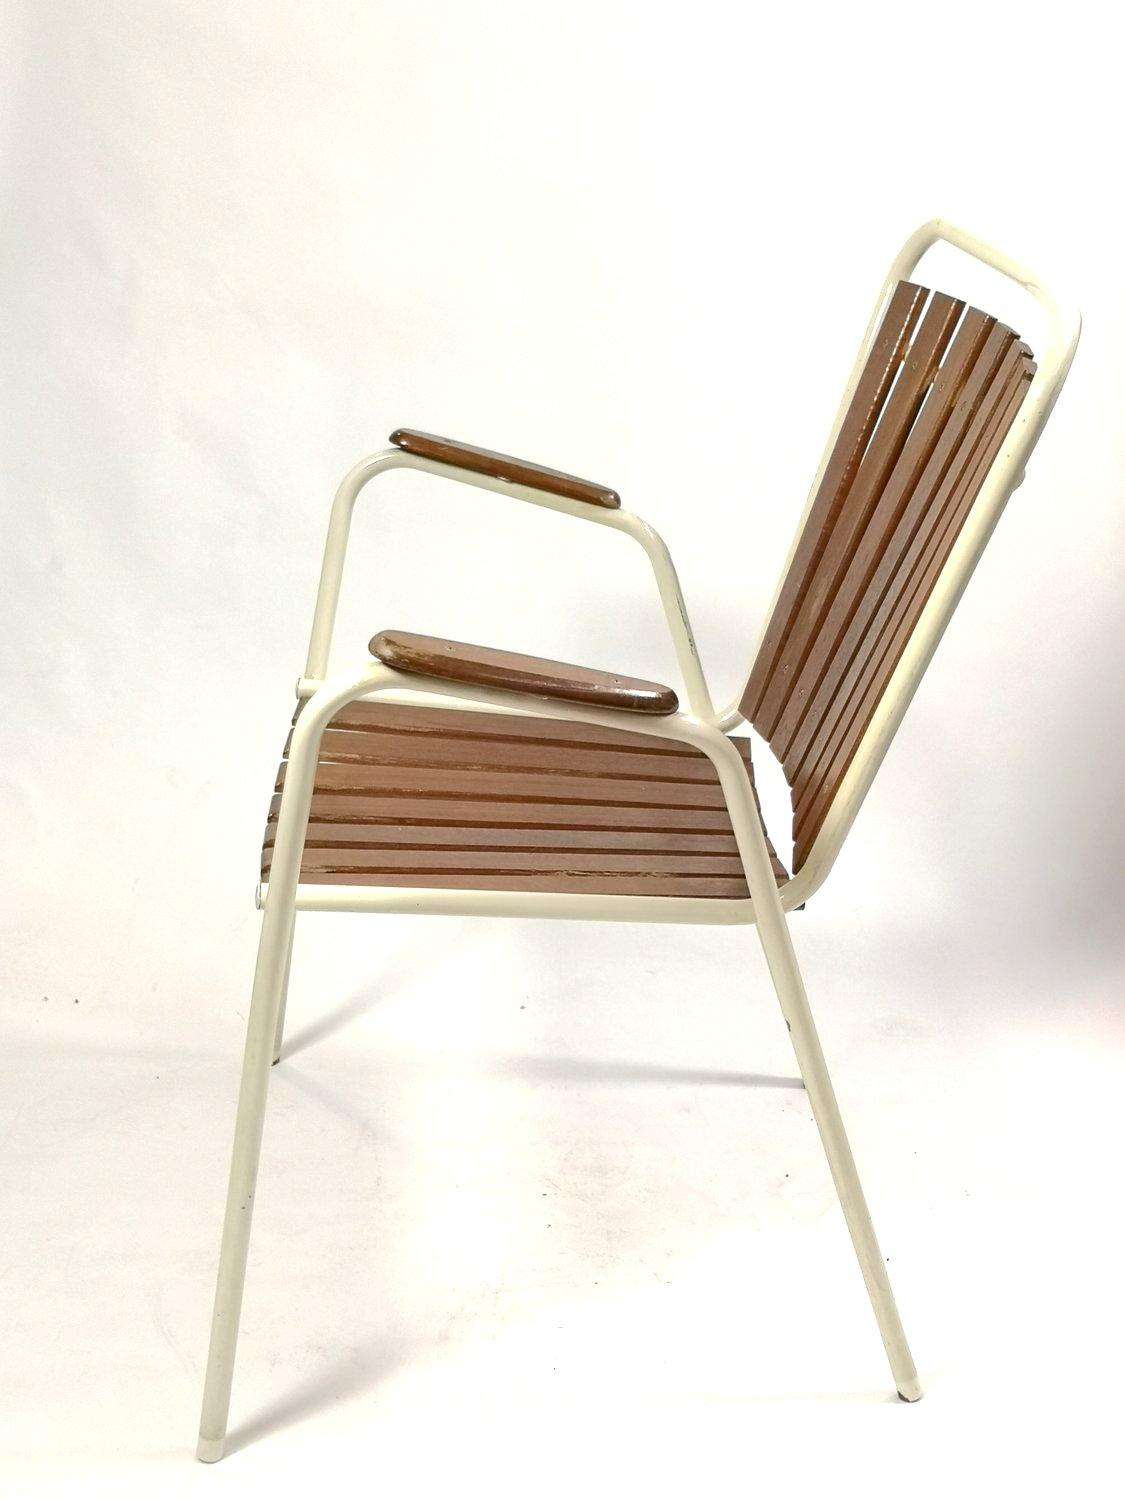 Set of 4 Mid-century modern Danish teak outdoor chairs. Apart from some minor damages attributed to usage, the chairs are in good condition. The back and seat are made of teak wood. Classical, elegant design.